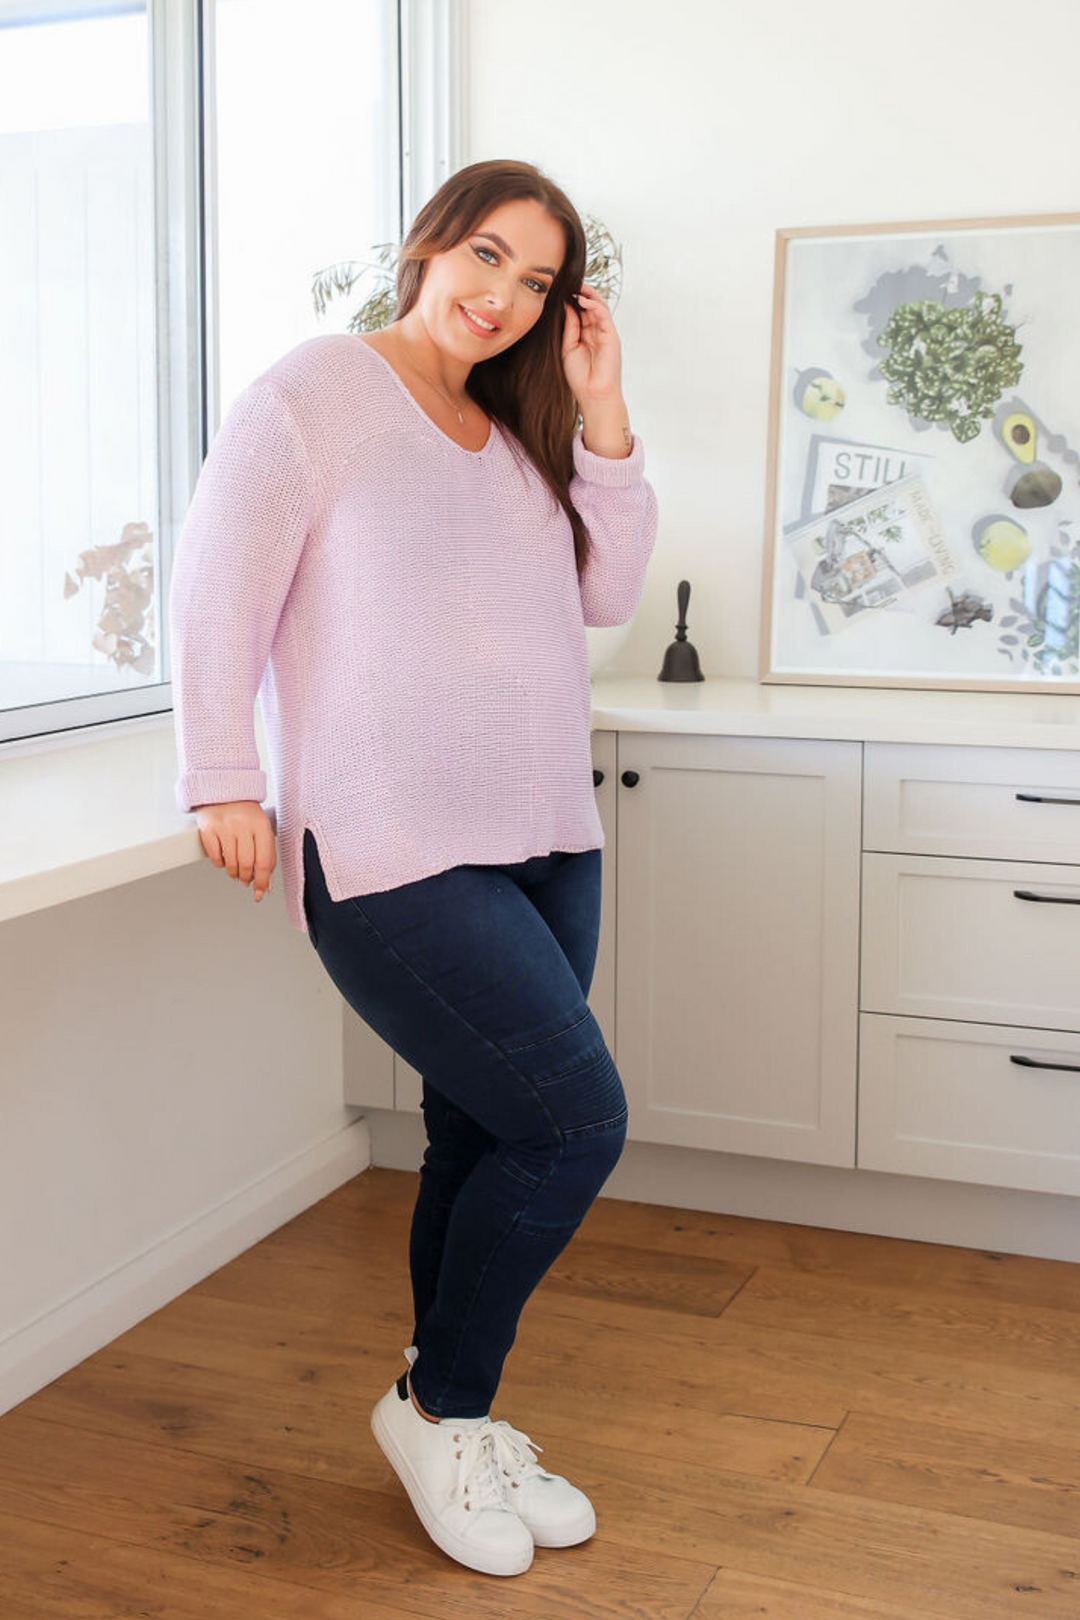 Ladies Long Sleeve Knit - Lilac - Cotton Knit Jumper - V Neckline - Sizes S/M - L/XL - Millie Knit Front Full Length View Paired with Delilah Dark Denim Jeans - Daisy's Closet